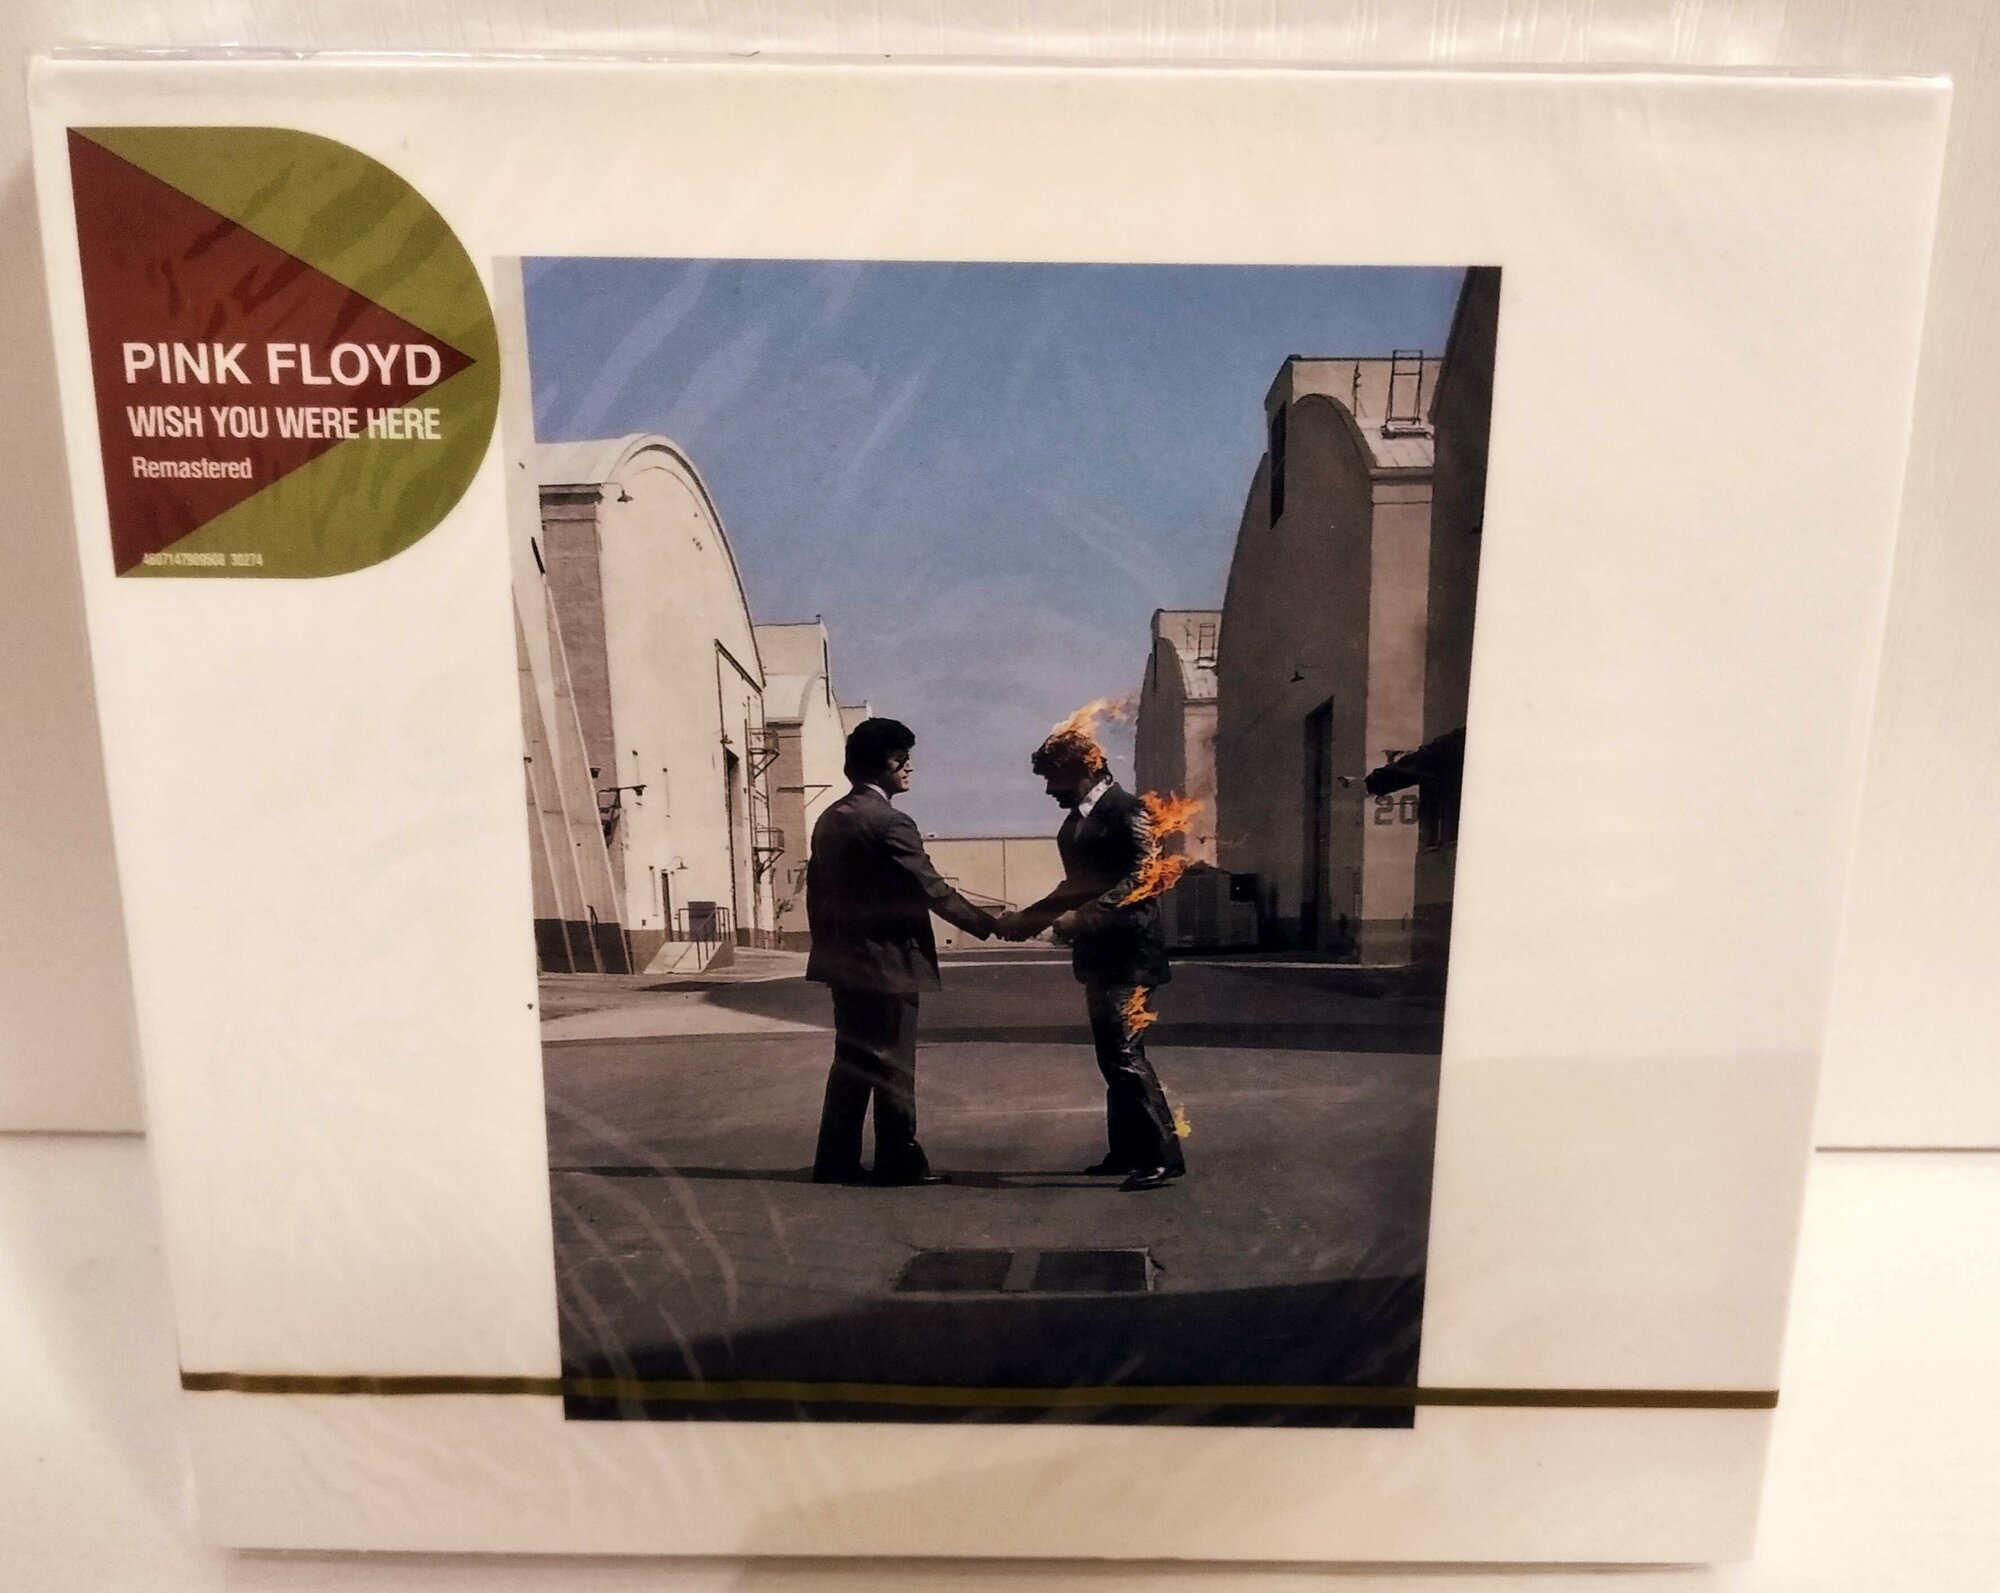 Pink Floyd "Wish You Were Here" 2 CD (Remastered)